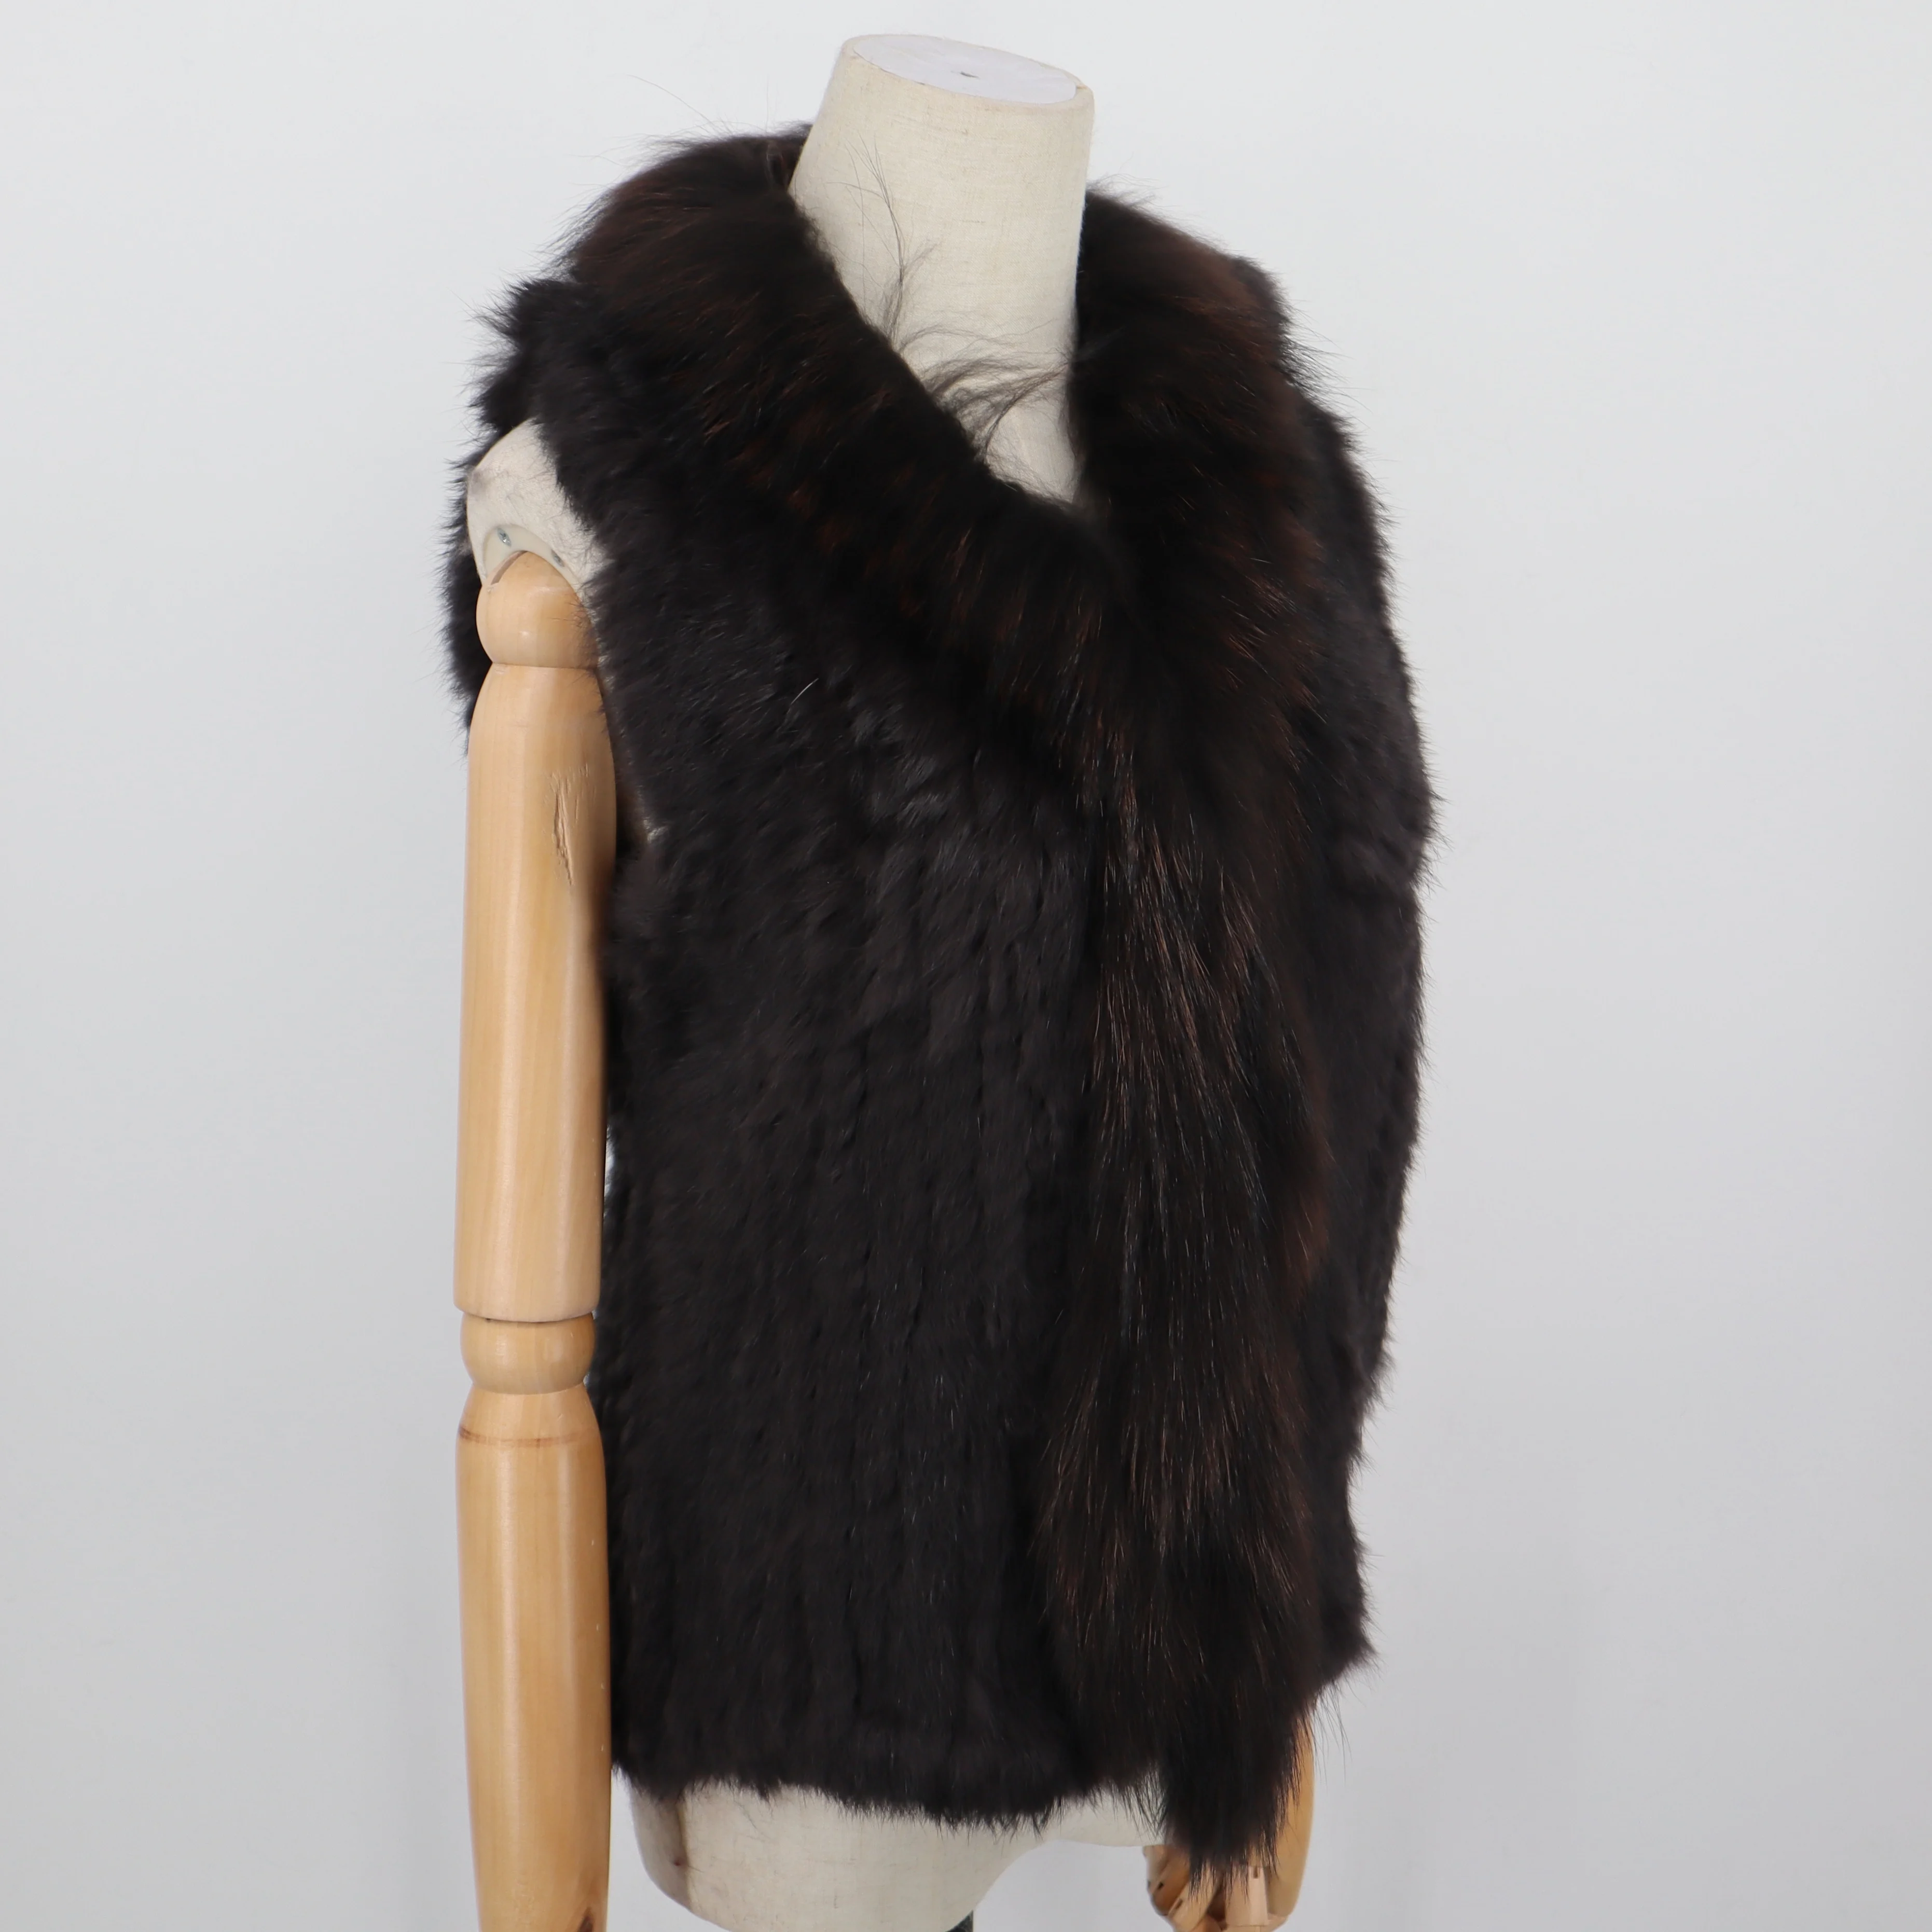 2021 Fashion Real Rabbit Fashion Fur Vest High-end Women Knitted Sleeveless Fur Vests With Natural Raccoon Fur Jacket Women Coat